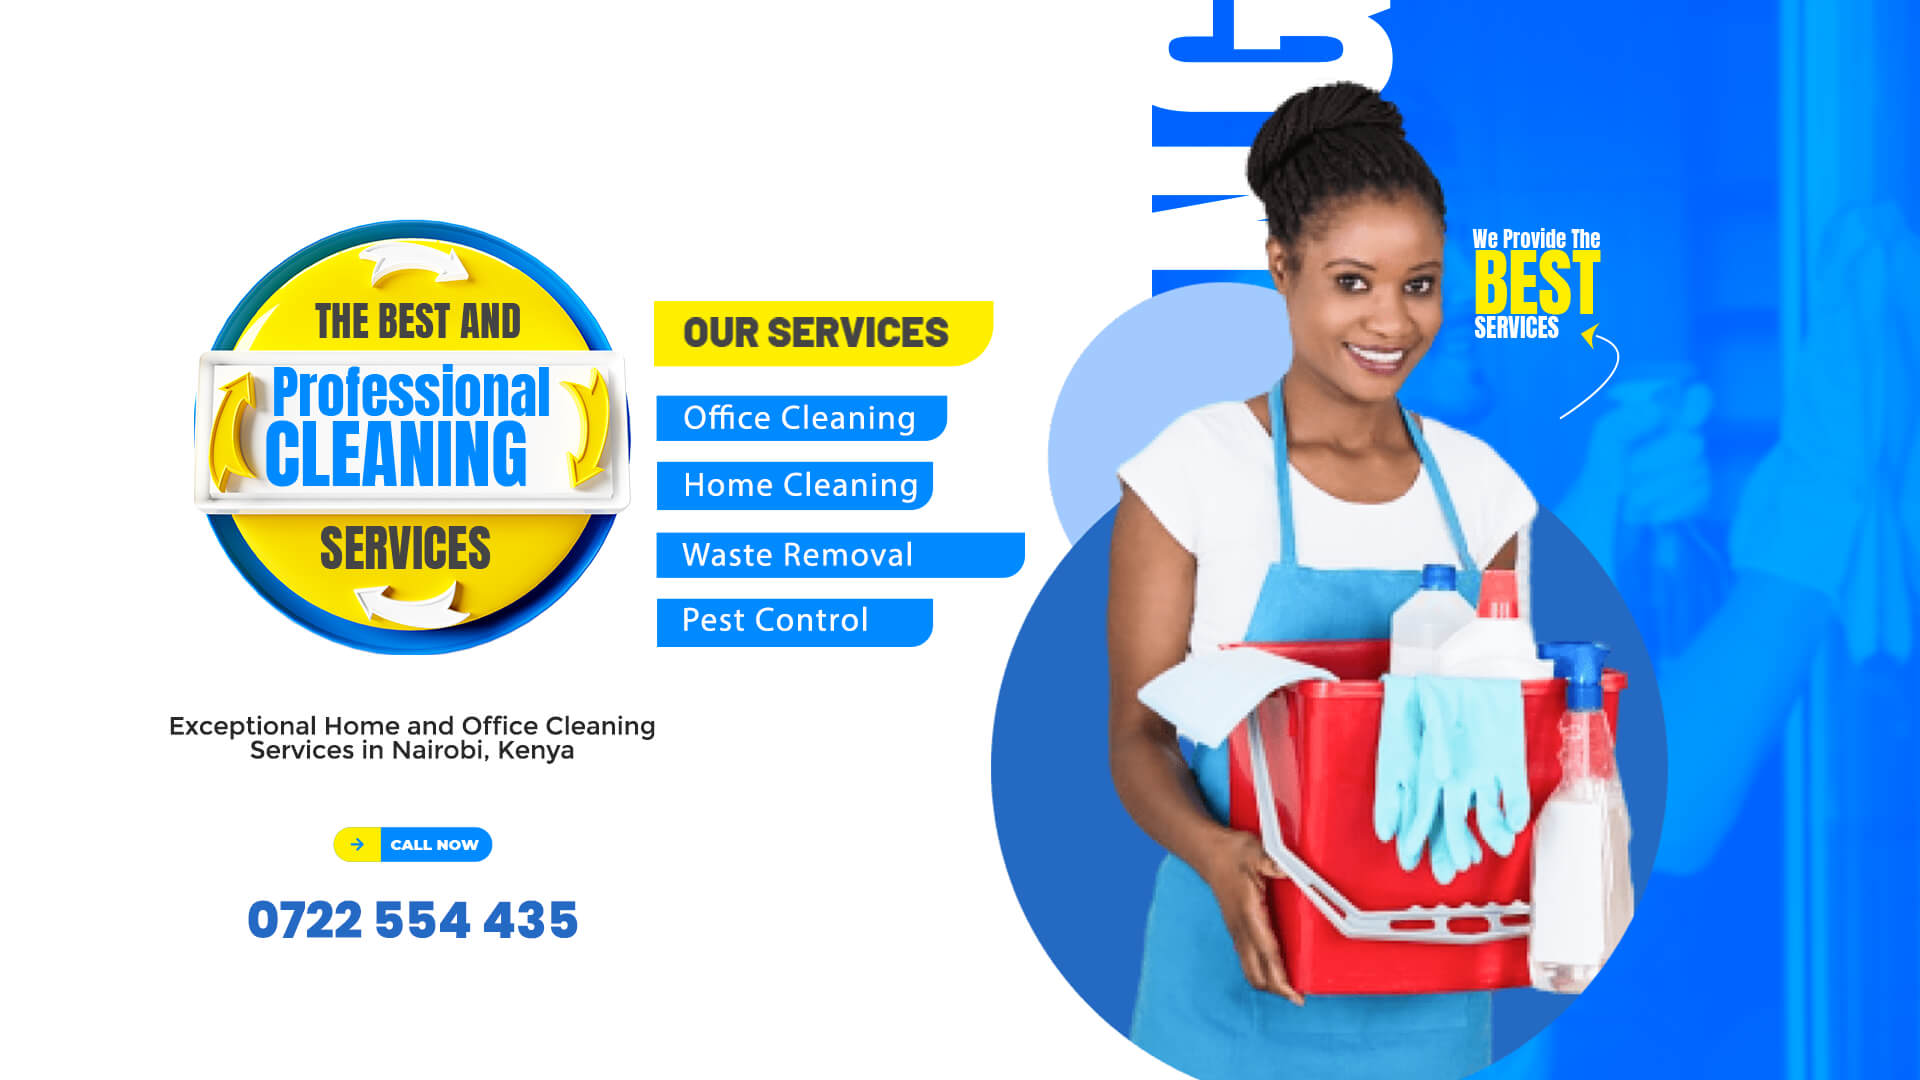 Swimming Pool Cleaning Service